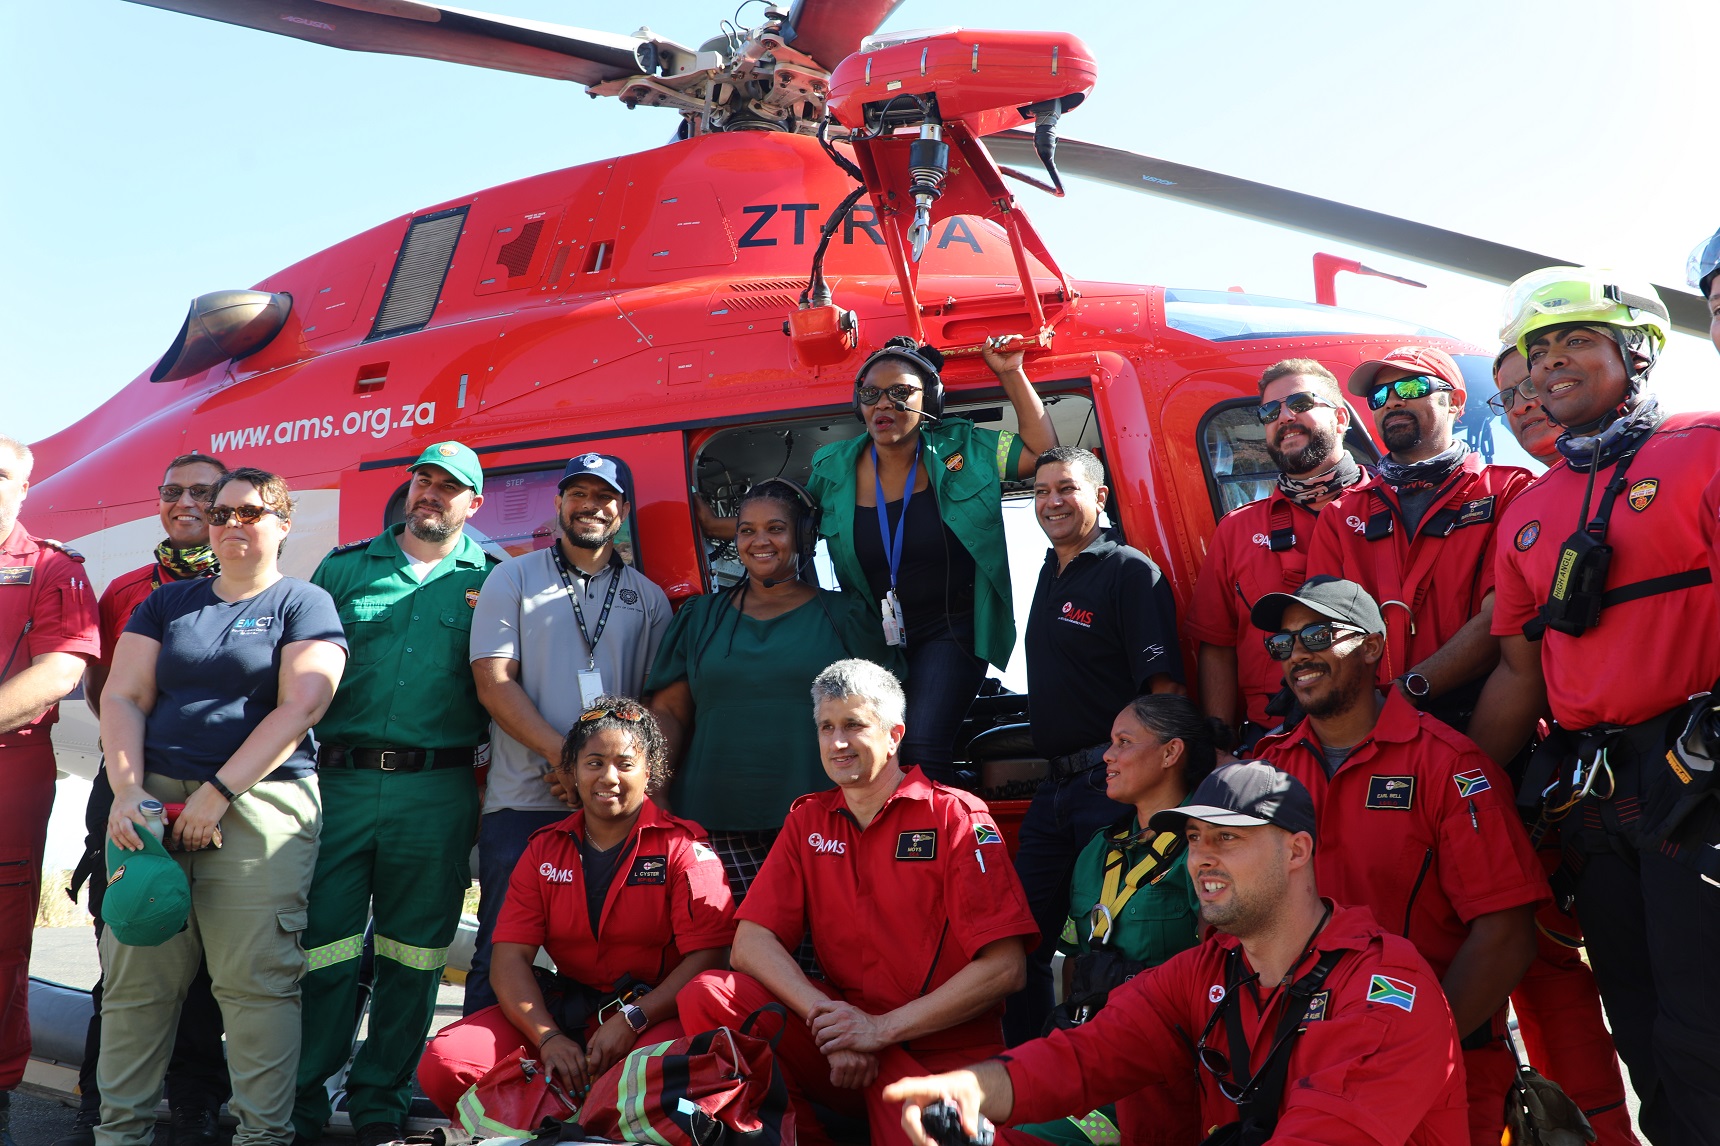 Minister Prof Nomafrench Mbombo accompanied by the AMS crew and management, as well as EMS officials from the Department and local representation from the City of Cape Town.